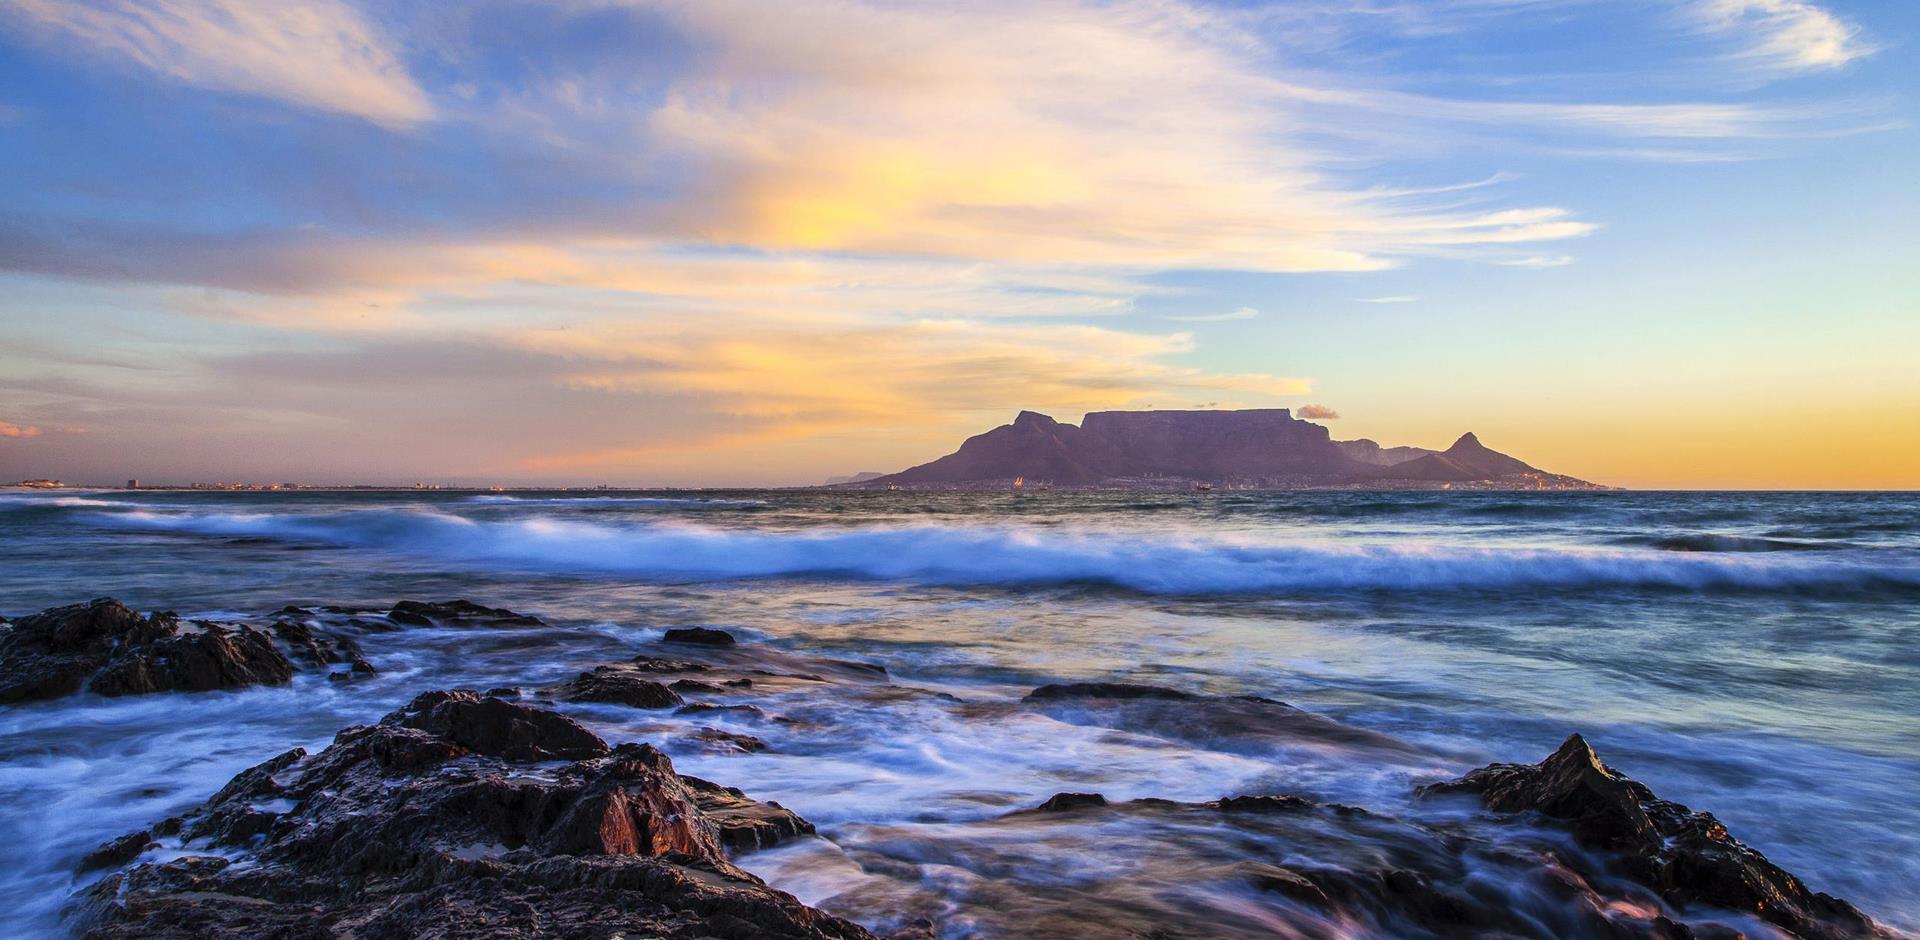 Cape Town - Things to do in January